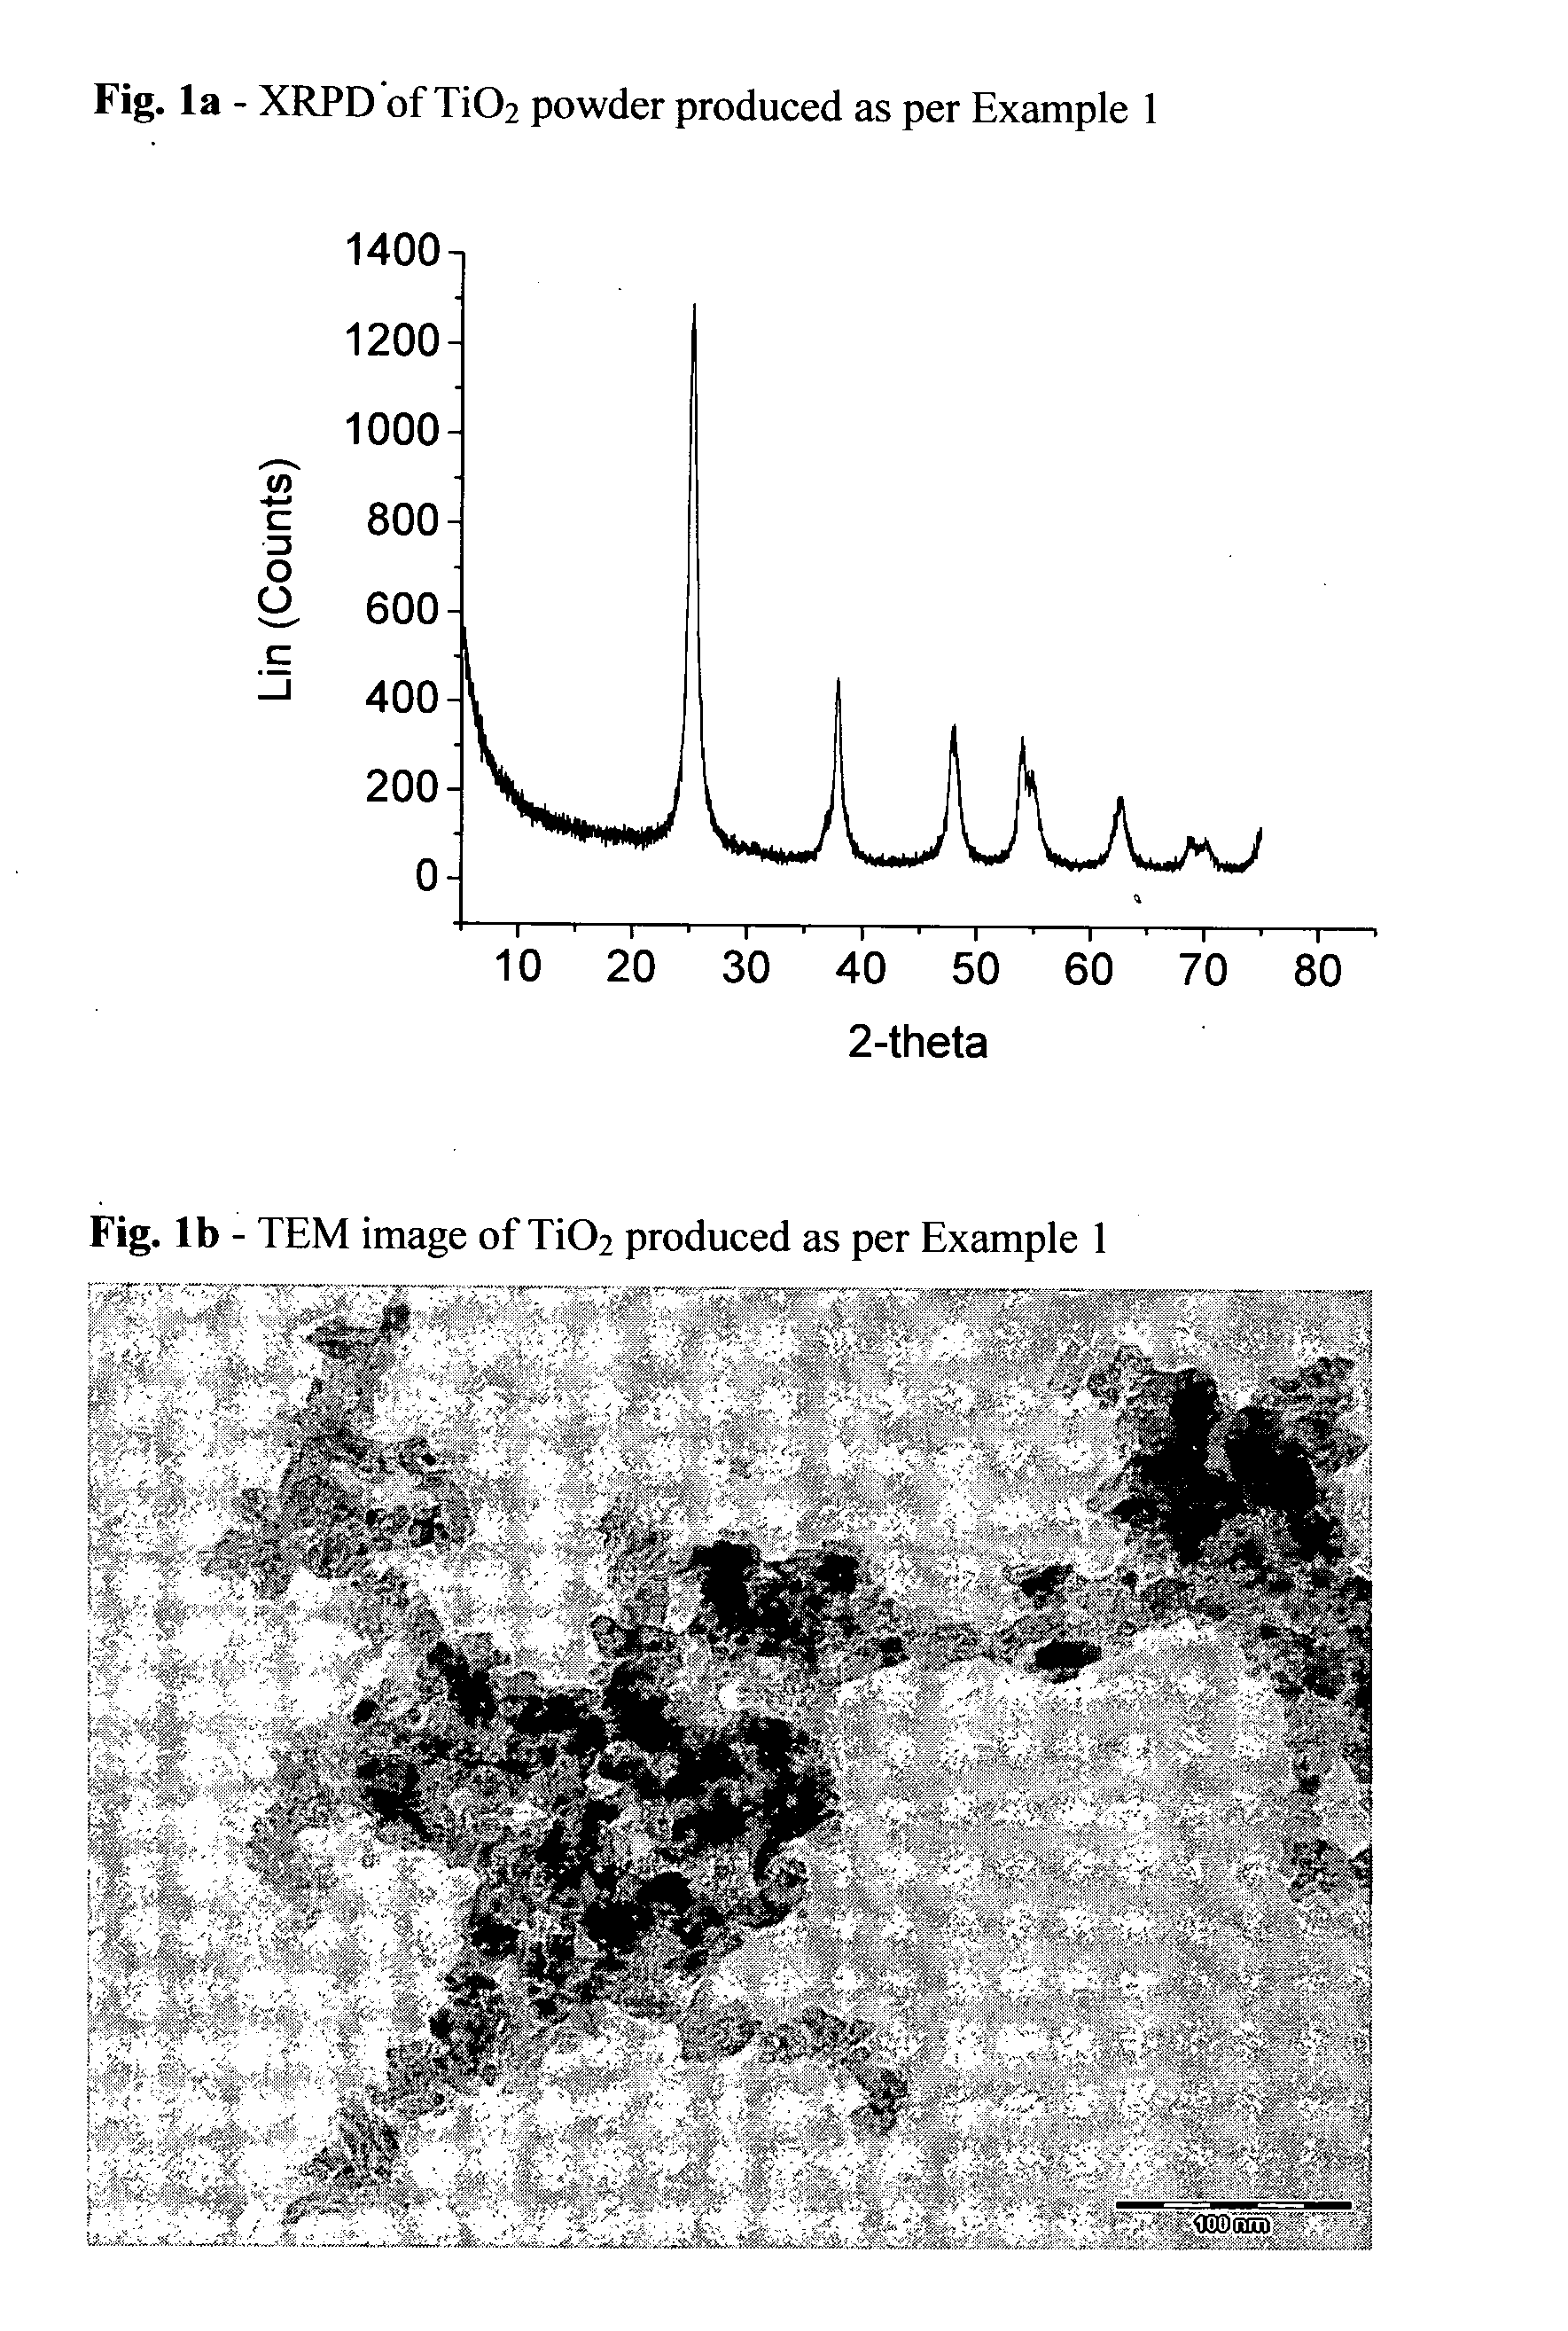 Process for the preparation of titanium dioxide with nanometric dimensions and controlled shape